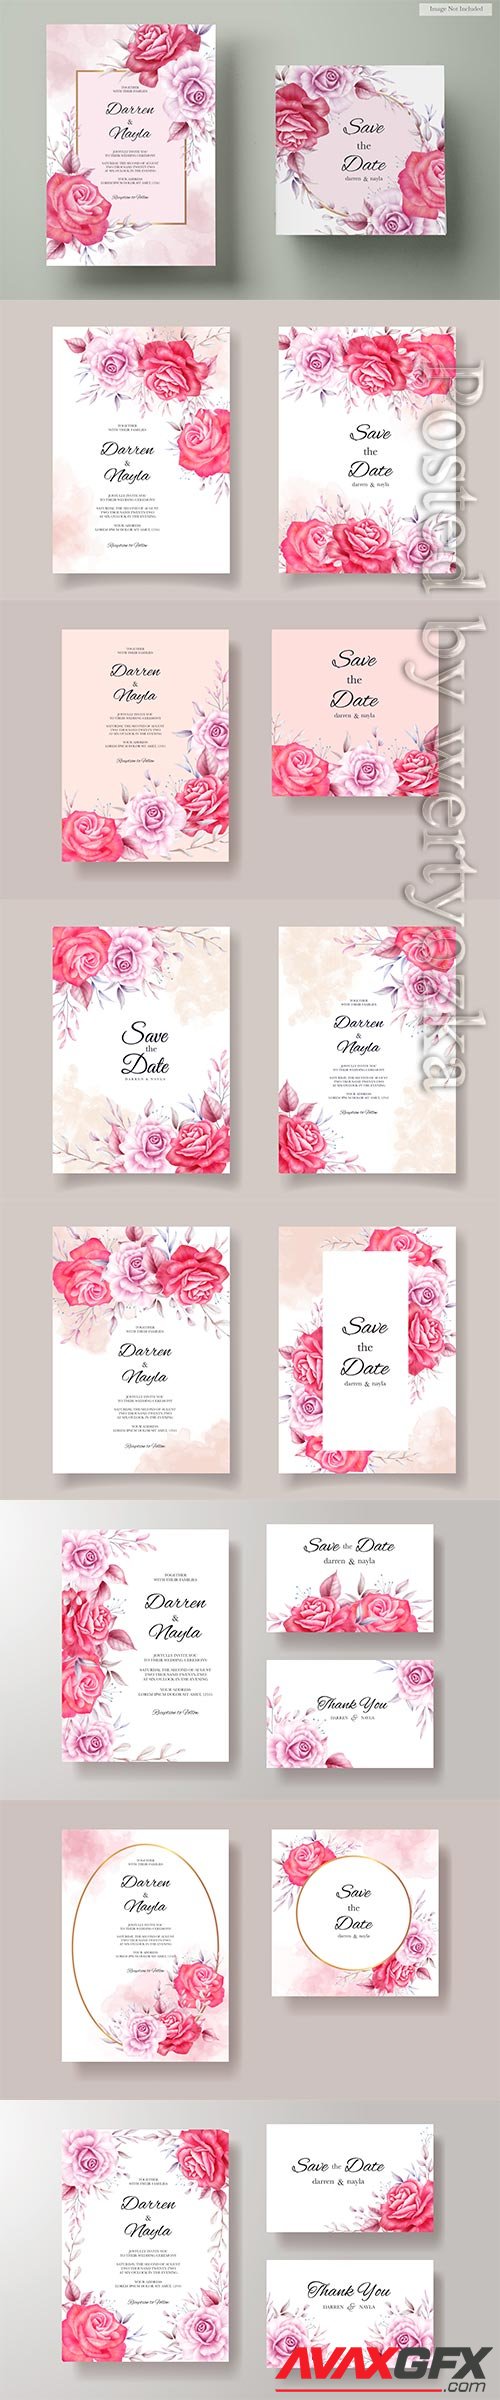 Beautiful wedding invitation with red and purple roses